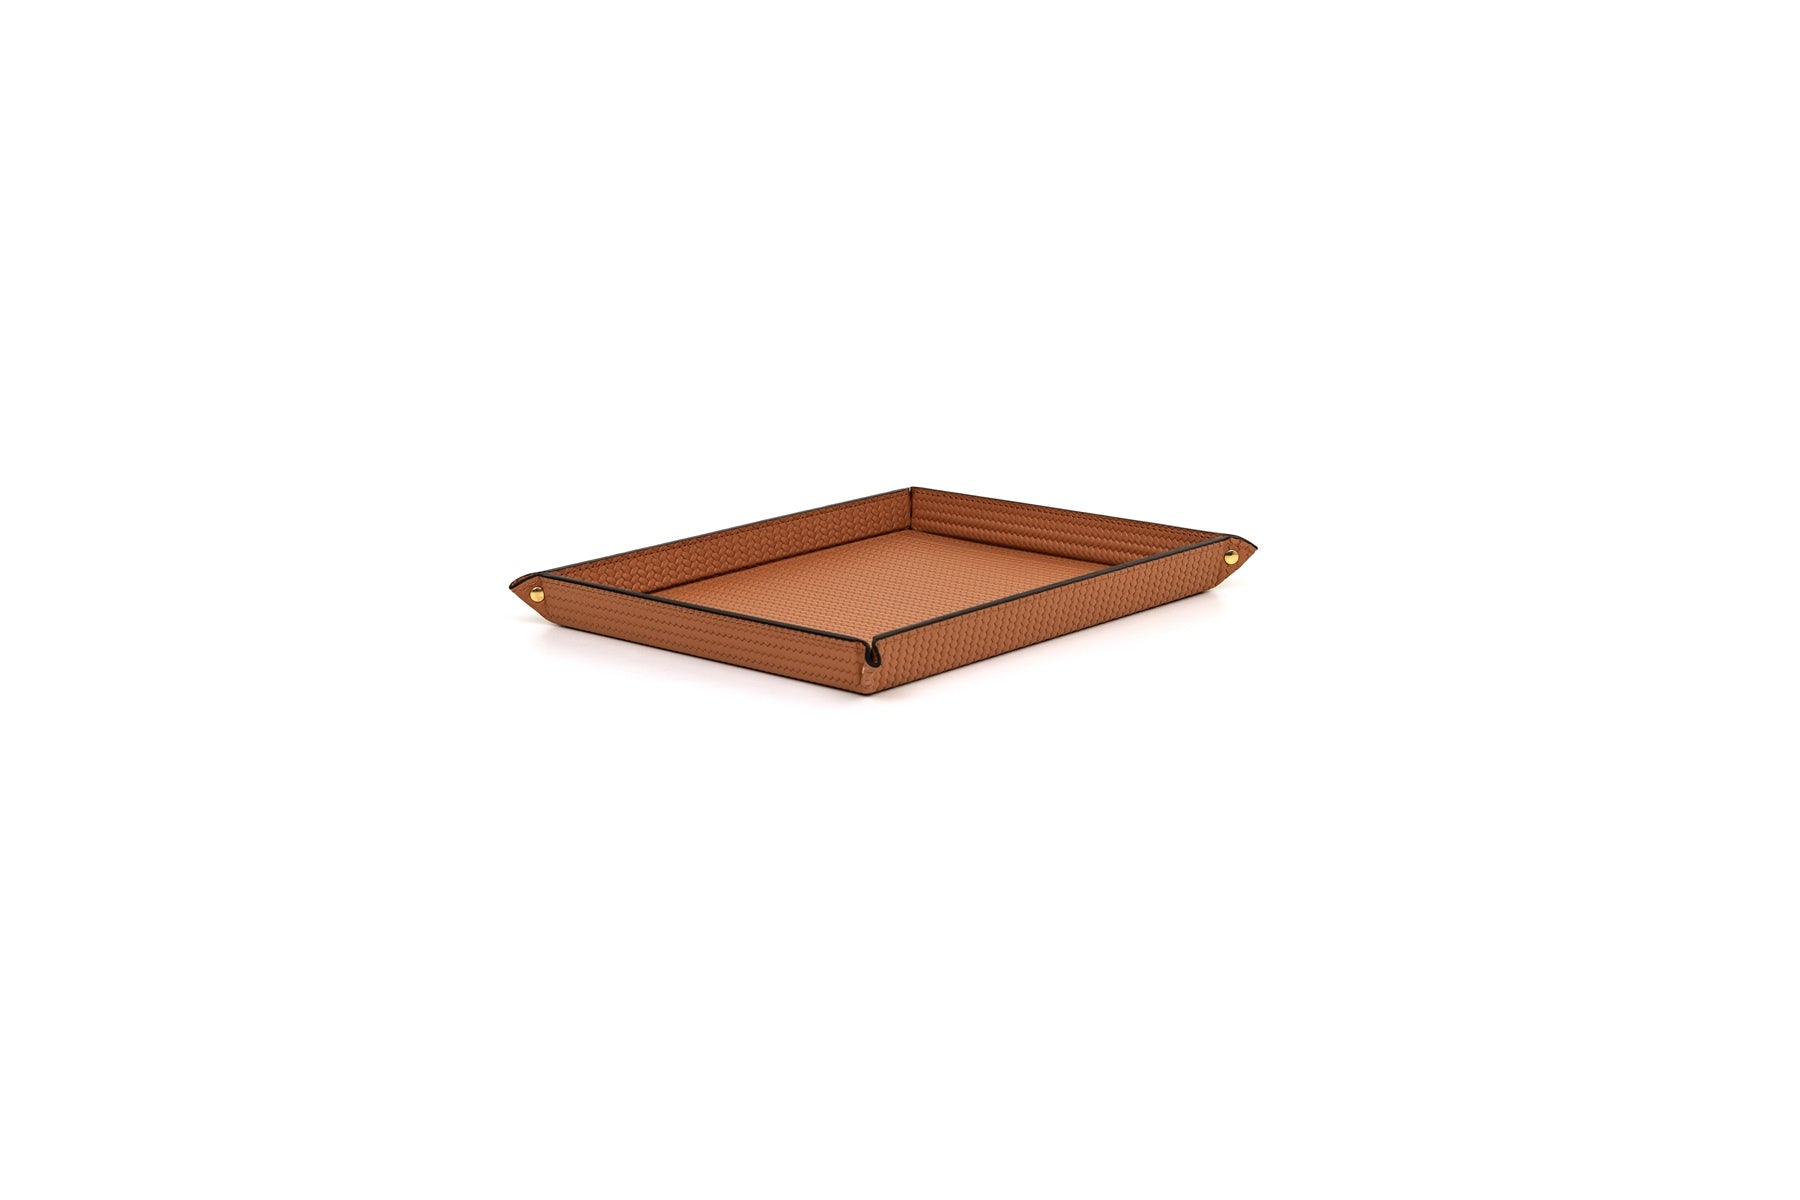 Pinetti Leather Rigid Trinket Tray With Corner Studs | Trinket trays made entirely of leather | Closed on the corners by gold studs | Discover Luxury Lifestyle Accessories at 2Jour Concierge, #1 luxury high-end gift & lifestyle shop